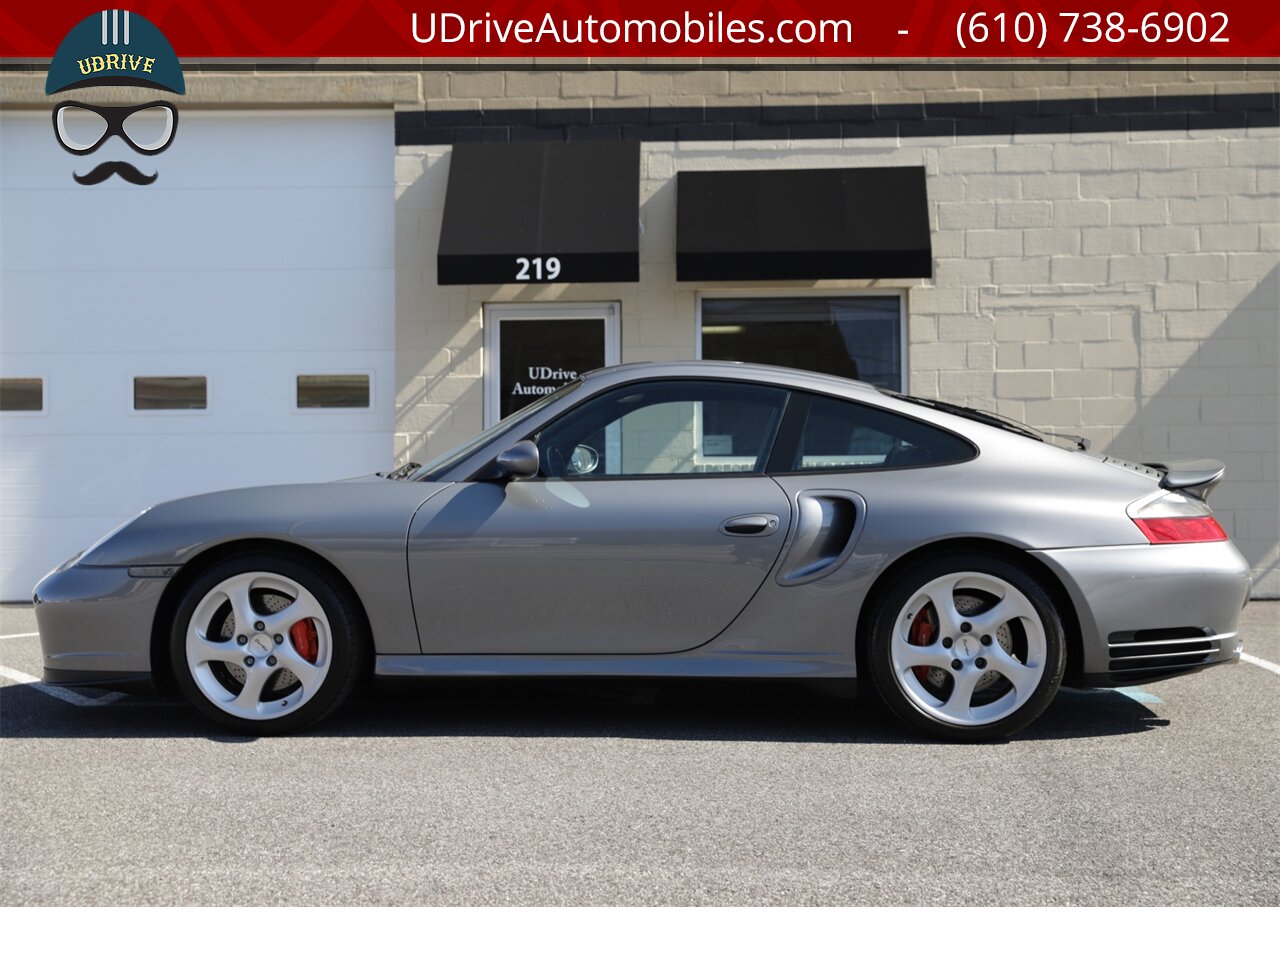 2003 Porsche 911 996 Turbo X50 Power Kit 6 Speed Seal Grey  over Black Leather - Photo 8 - West Chester, PA 19382